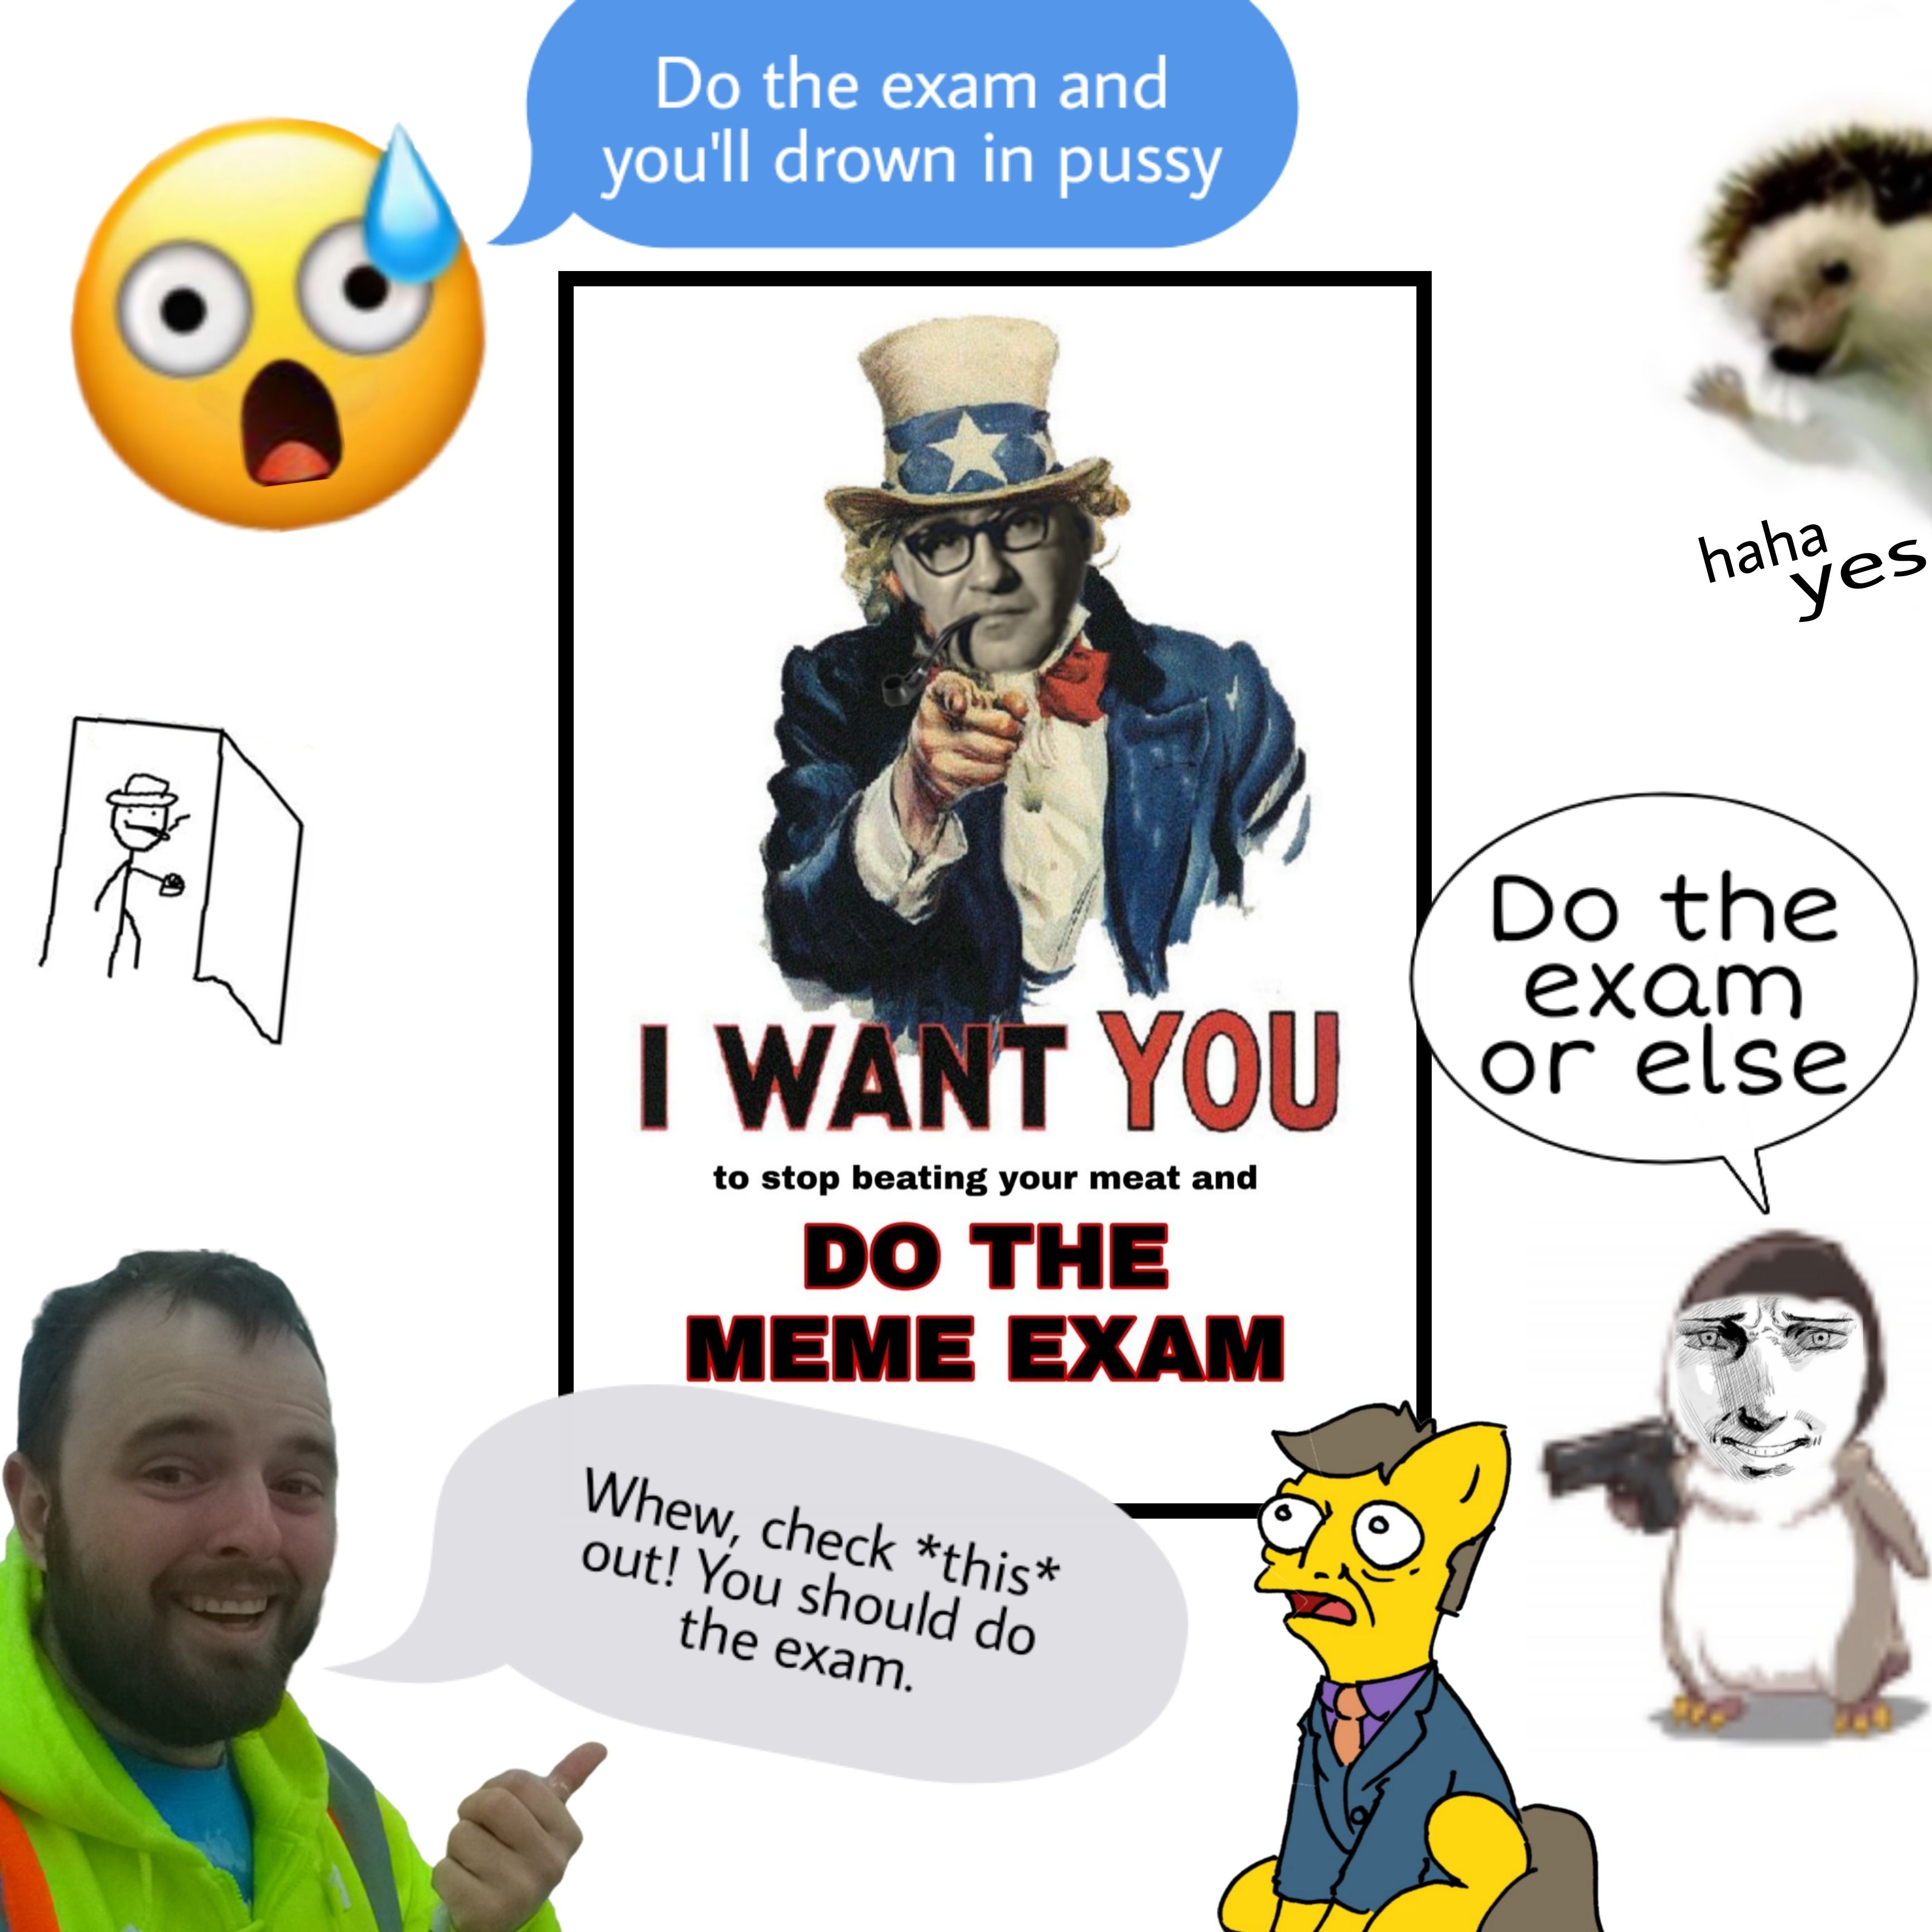 March Meme Exam is now open! Do it and a 25€ Steam Gift Card may be yours! Questions in comments